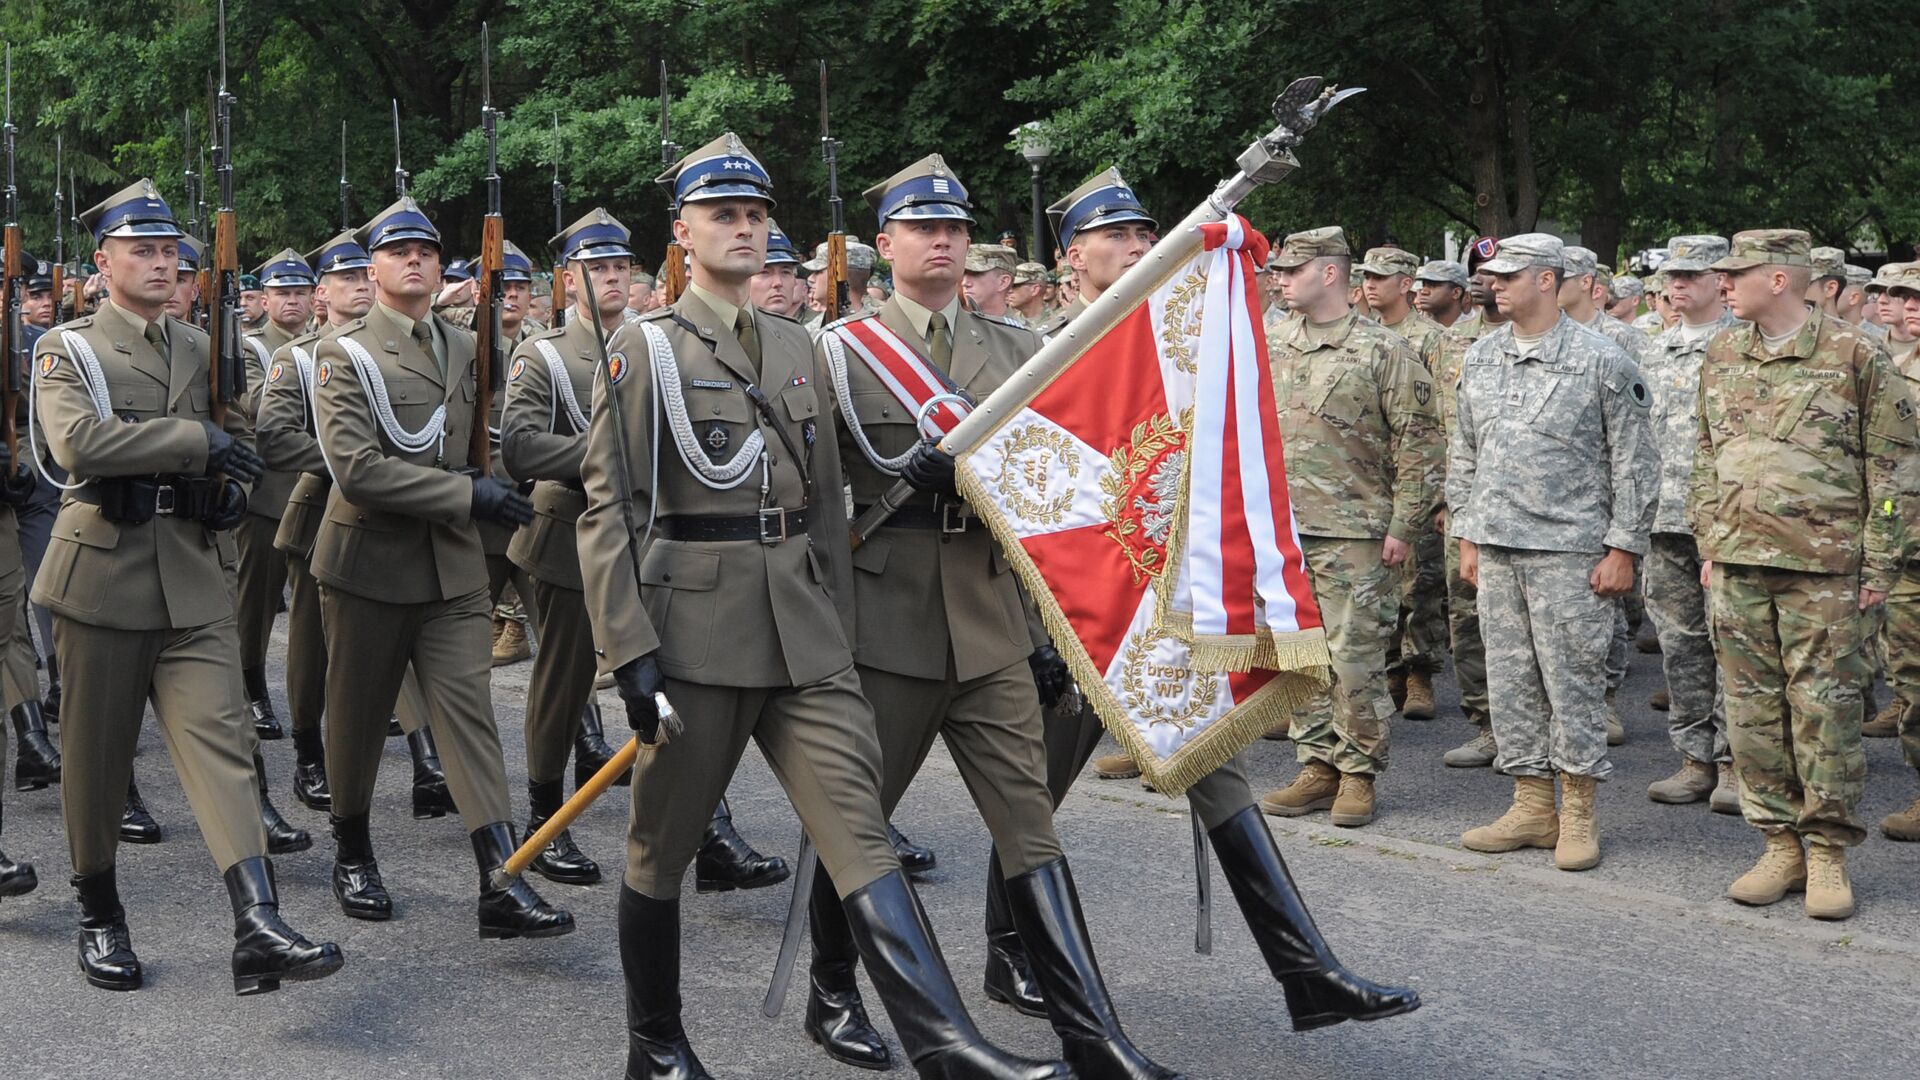 Polish honor guard march during the opening ceremony of the the Anaconda-16 military exercise in Rembertow, June 6, 2016 - Sputnik International, 1920, 17.05.2023